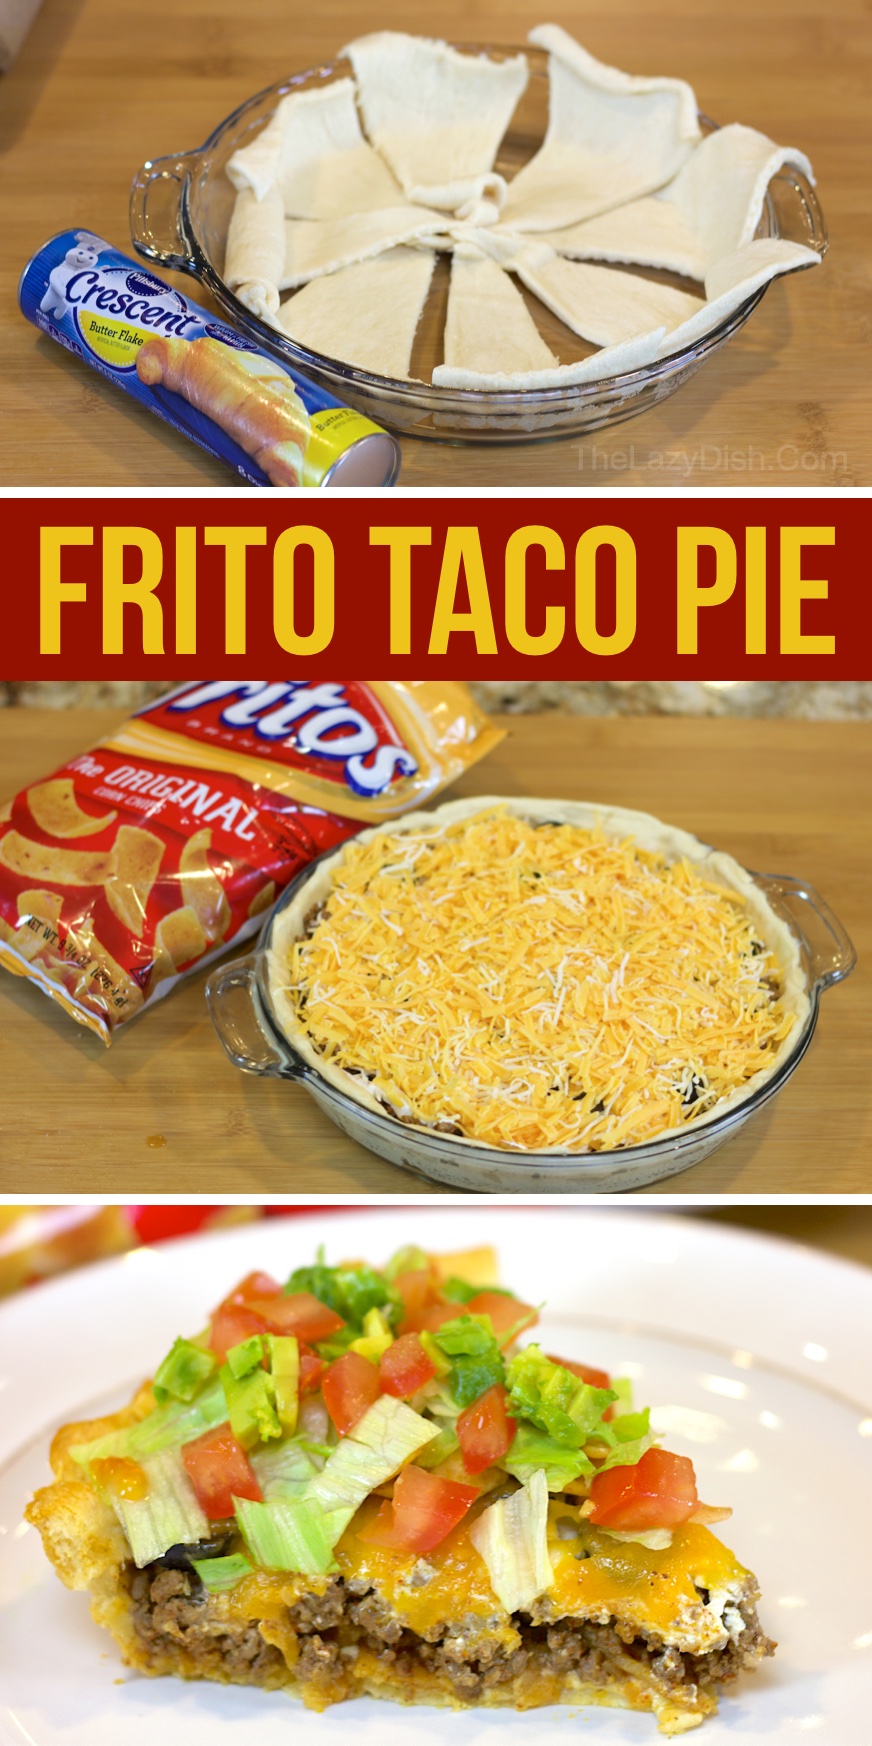 A fun and easy ground beef dinner idea for a family with kids! This Mexican inspired meal has a Pillsbury crescent dough crust and is stuffed full of beef, cheese, Fritos chips, sour cream, and anything else taco inspired that you'd like! Your picky eaters are going to love it.